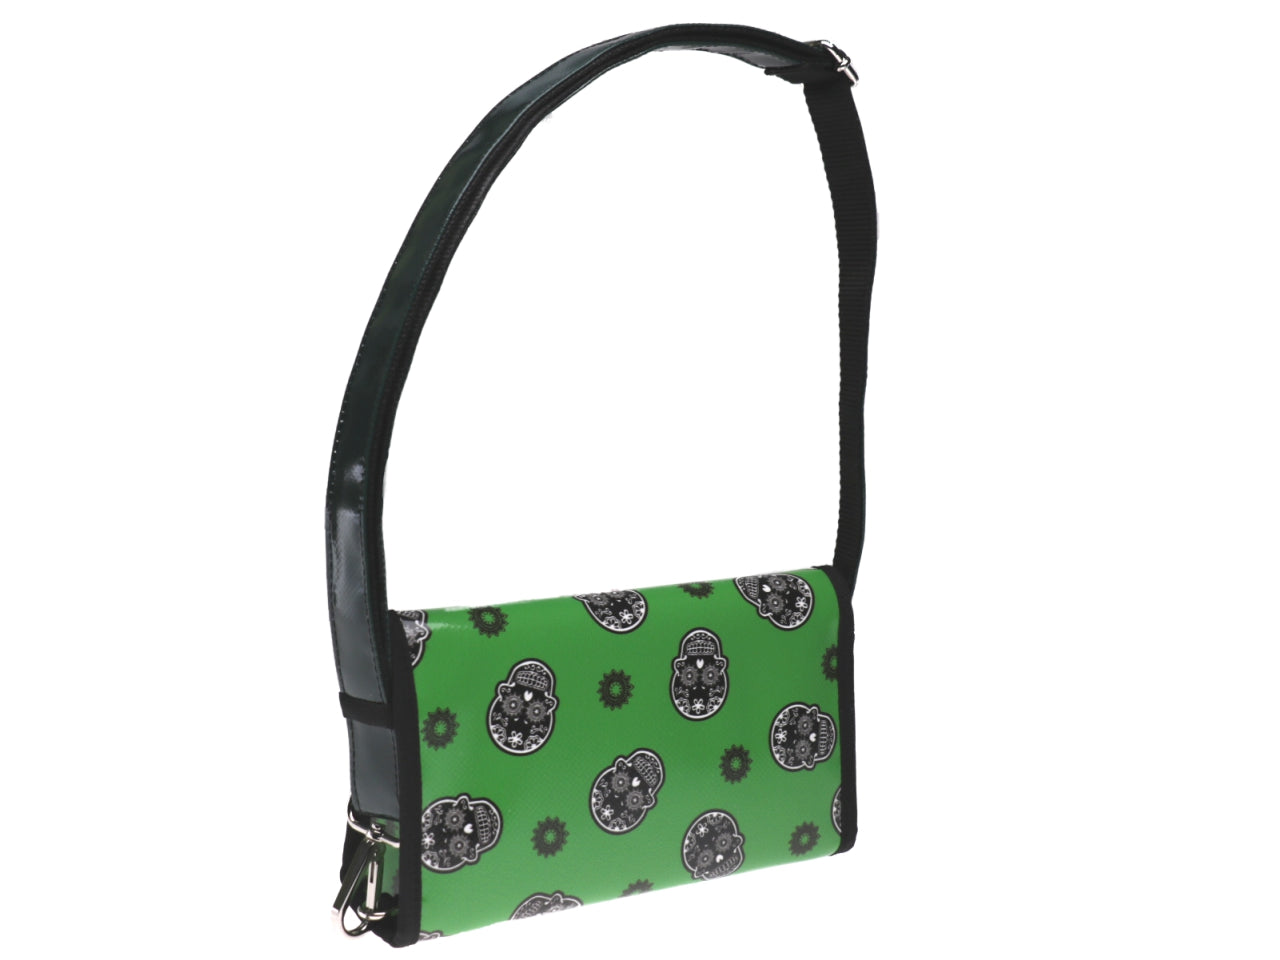 GREEN CLUTCH BAG "SKULLS". MODEL CANDY MADE OF LORRY TARPAULIN. - Limited Edition Paul Meccanico